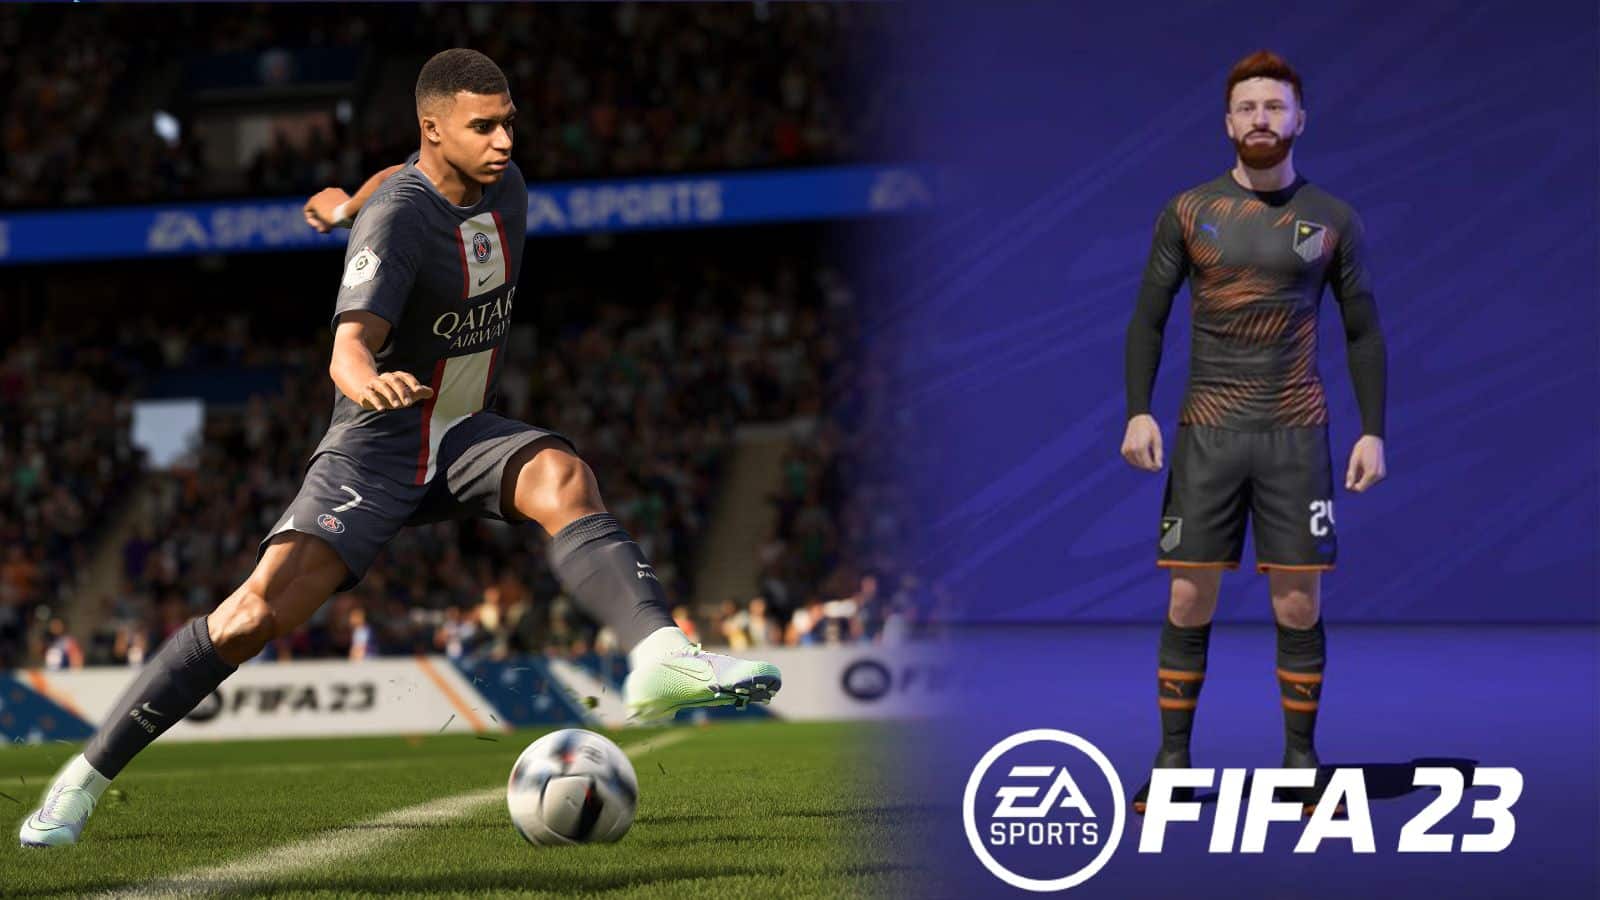 FIFA 23 crossplay announcement leaves whole community in the cold - Dexerto